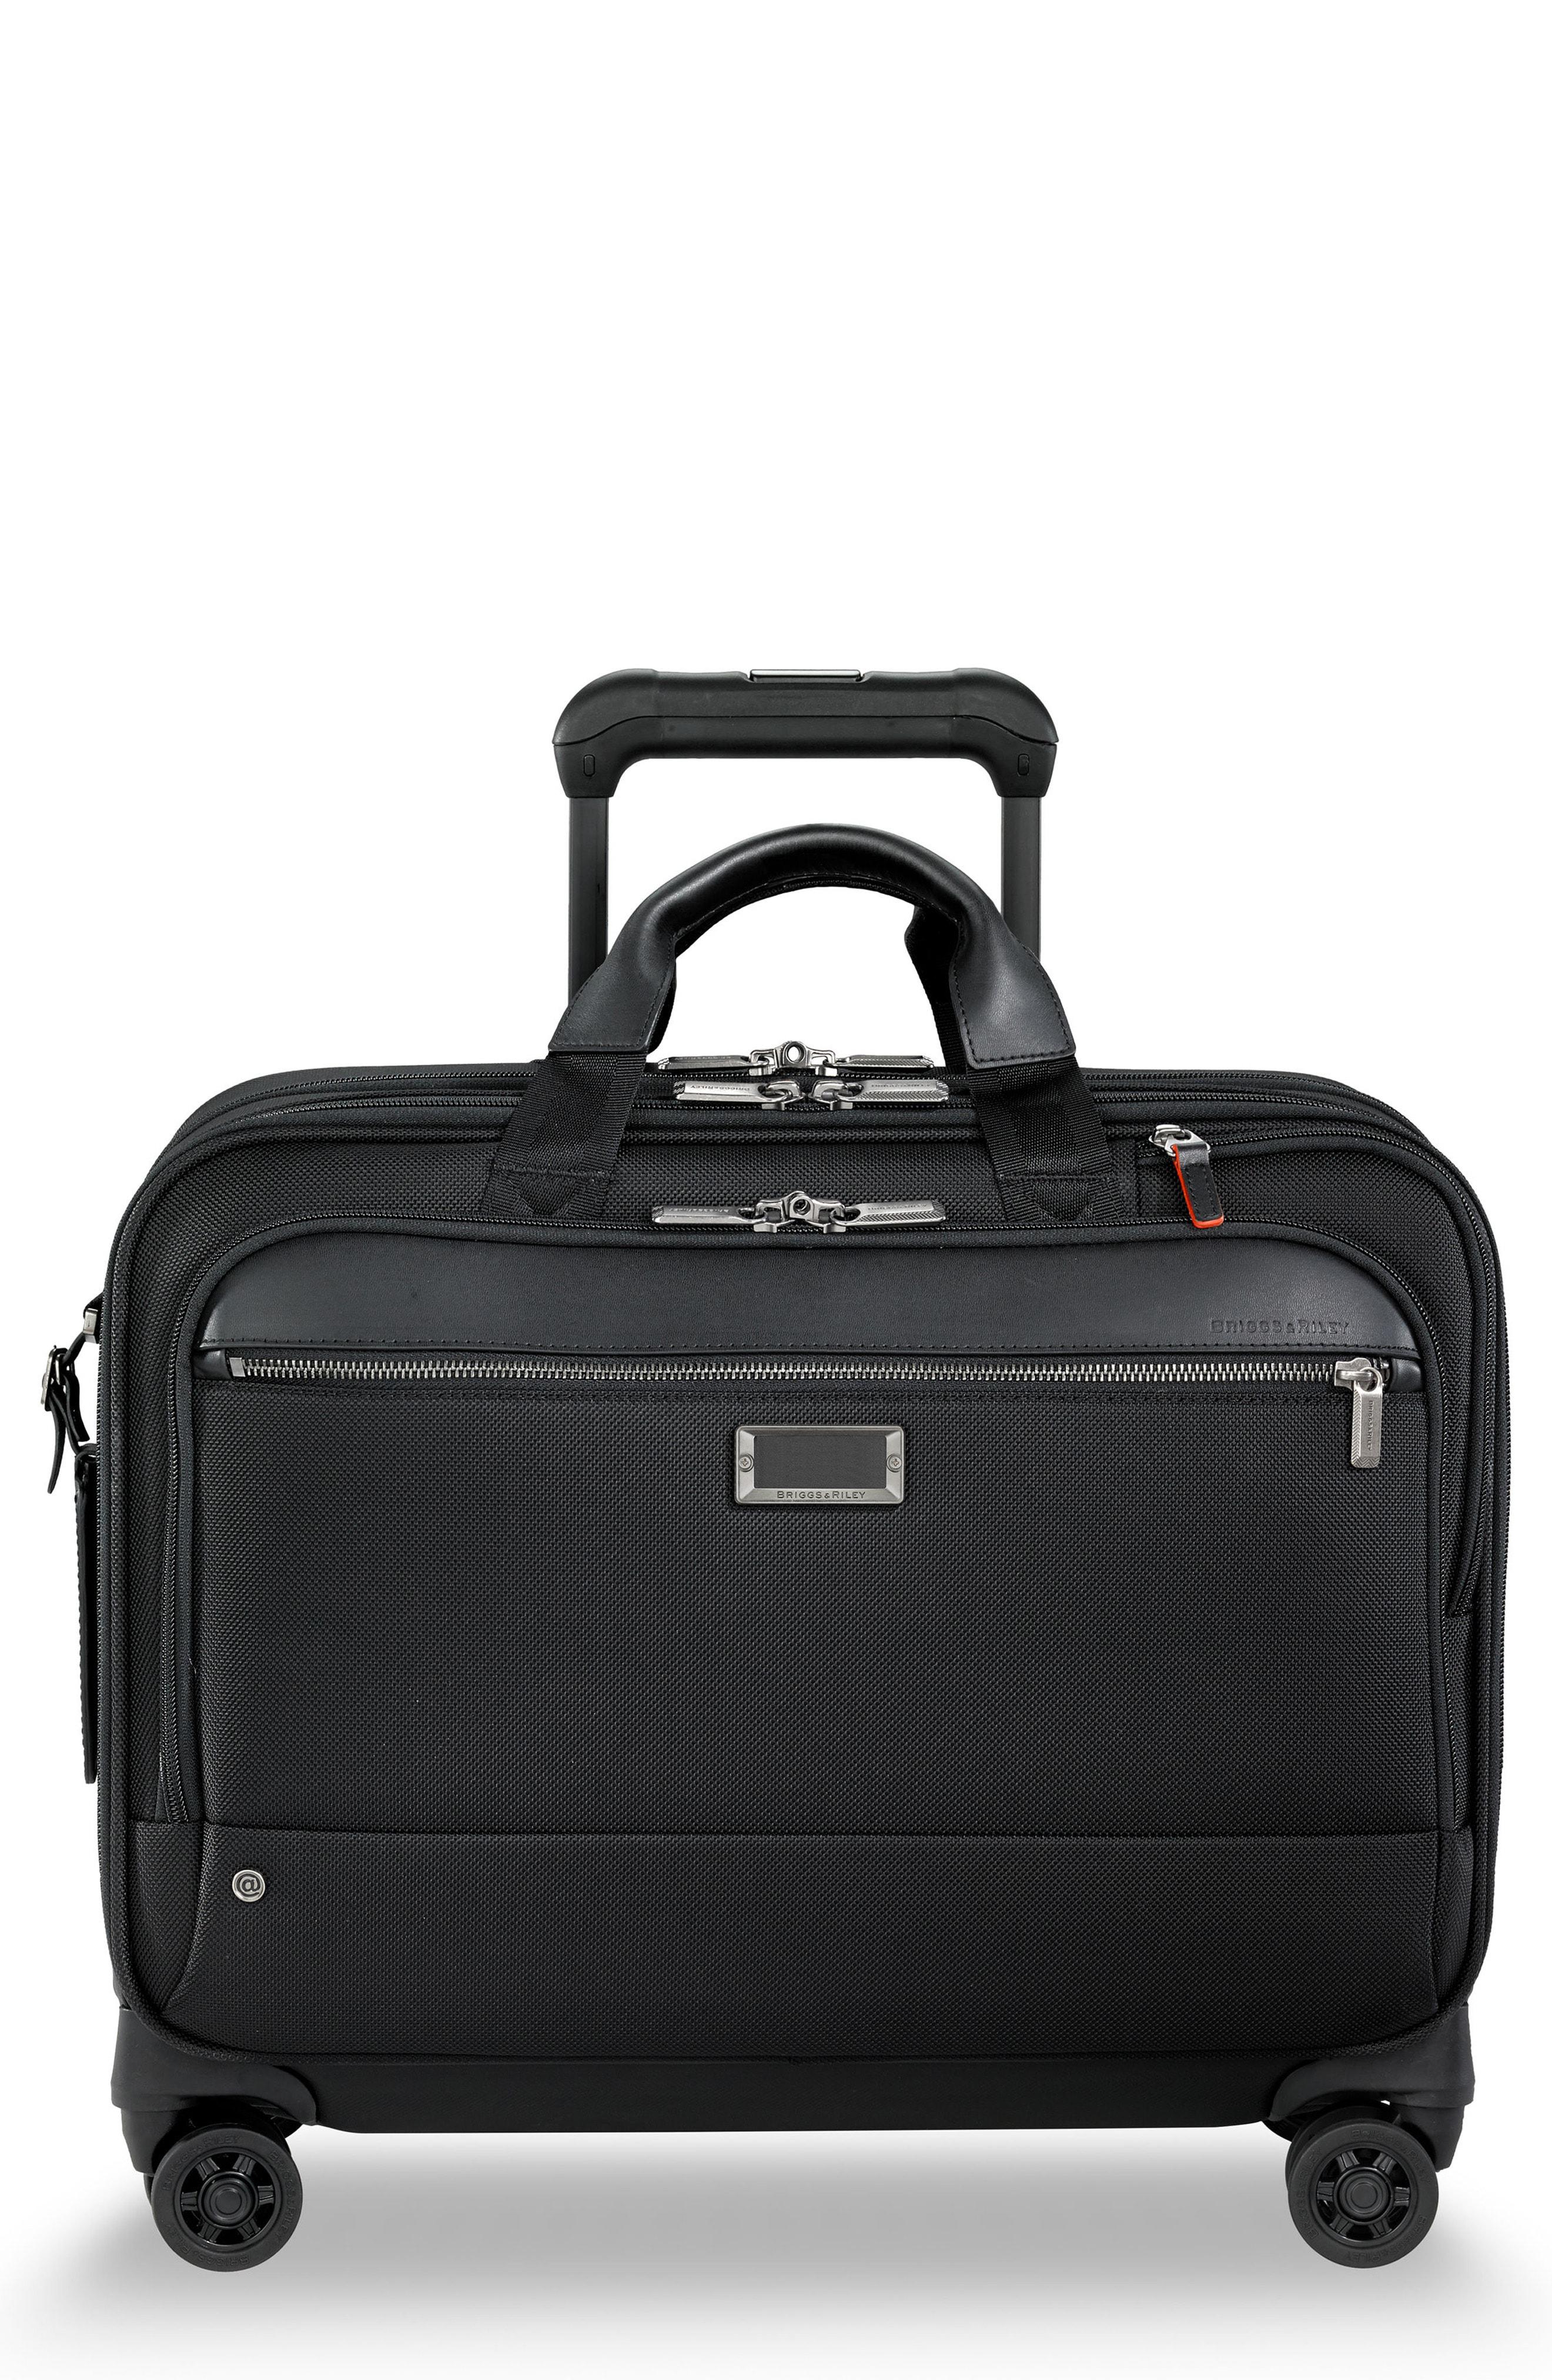 Lyst - Briggs & Riley @work Large Wheeled Briefcase in Black for Men